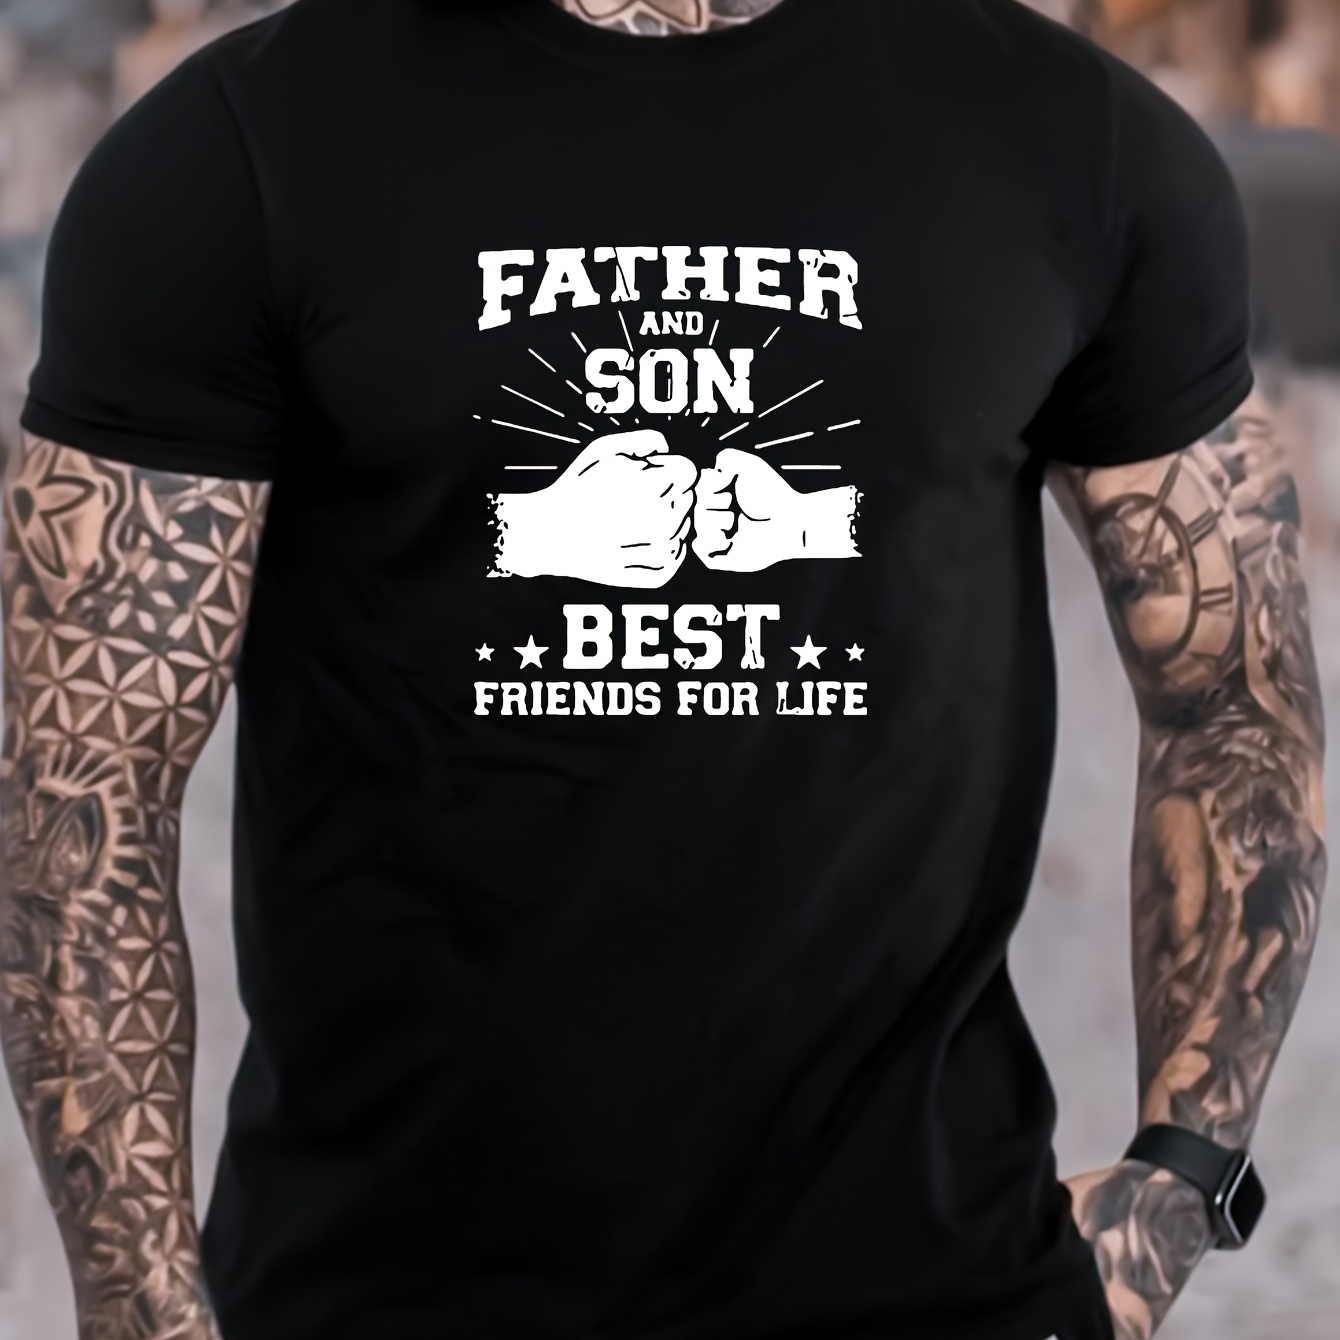 

Father & Son Print Men's Short Sleeve T-shirts, Comfy Casual Elastic Crew Neck Tops For Men's Outdoor Activities, Gifts For Father